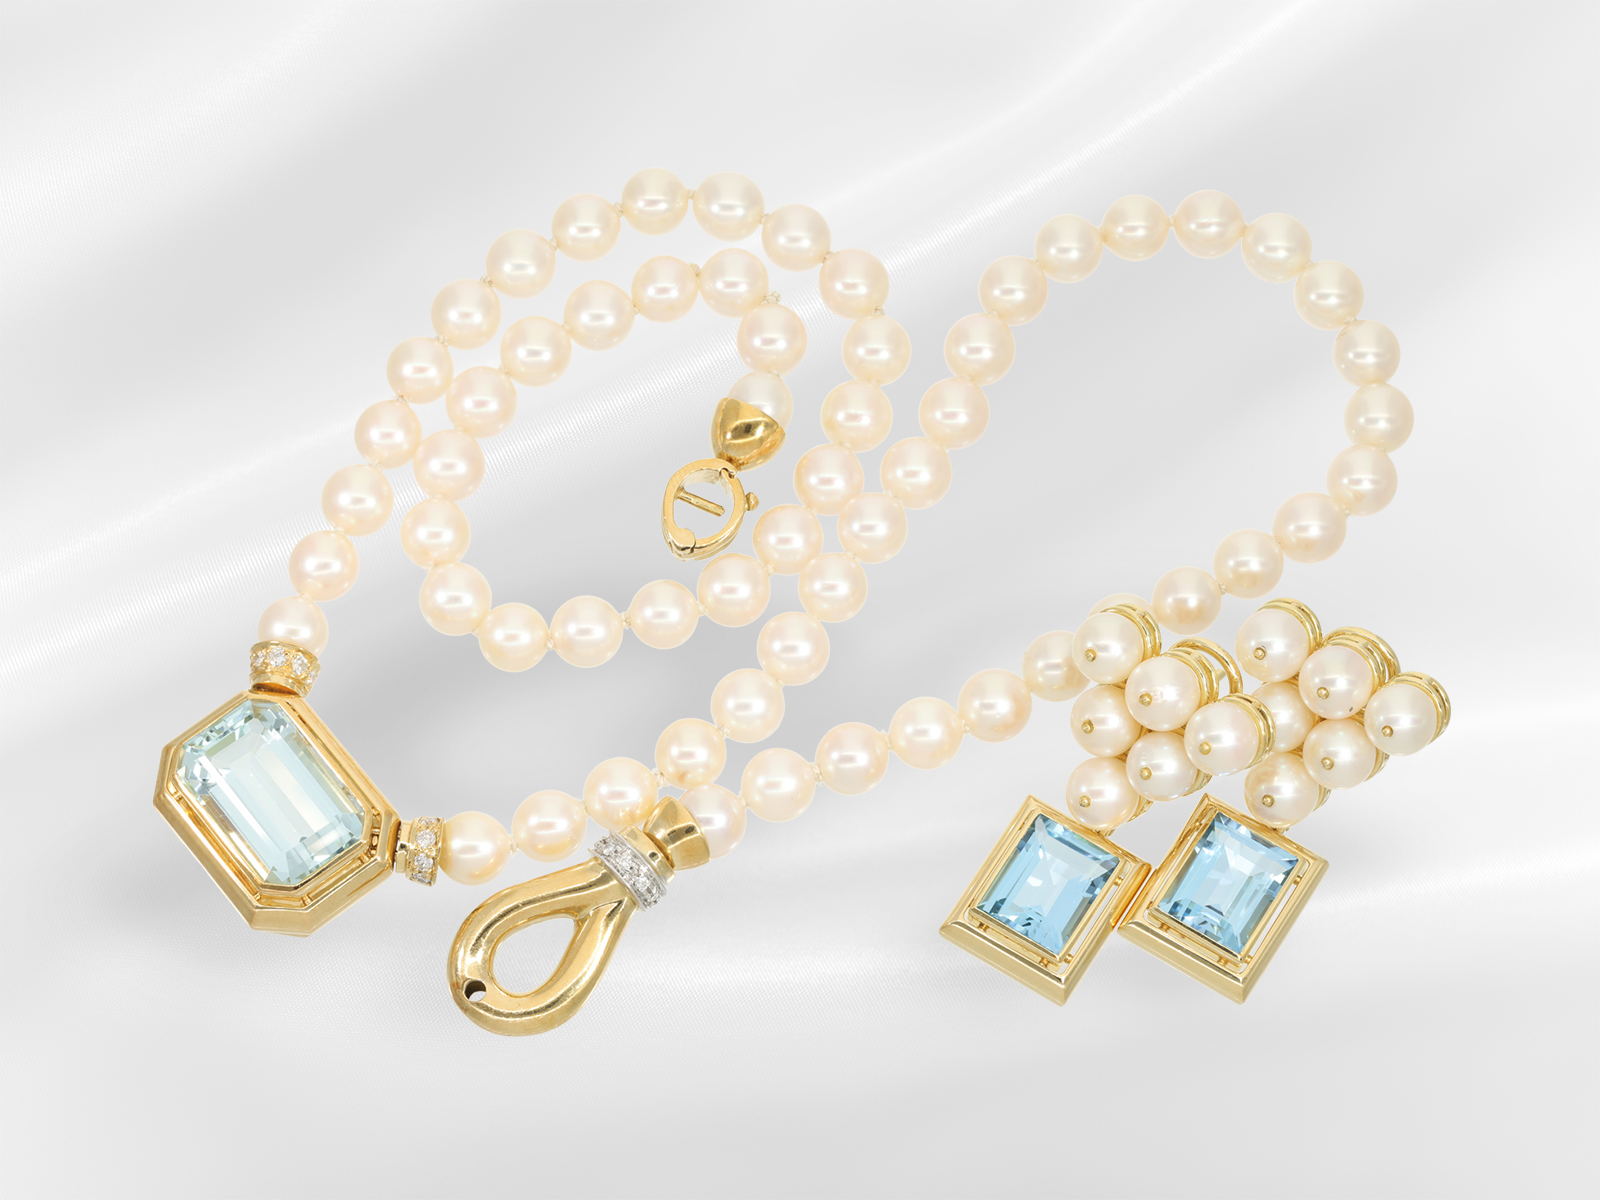 Chain/necklace: beautiful aquamarine/brilliant-cut diamond cultured pearl necklace with matching ear